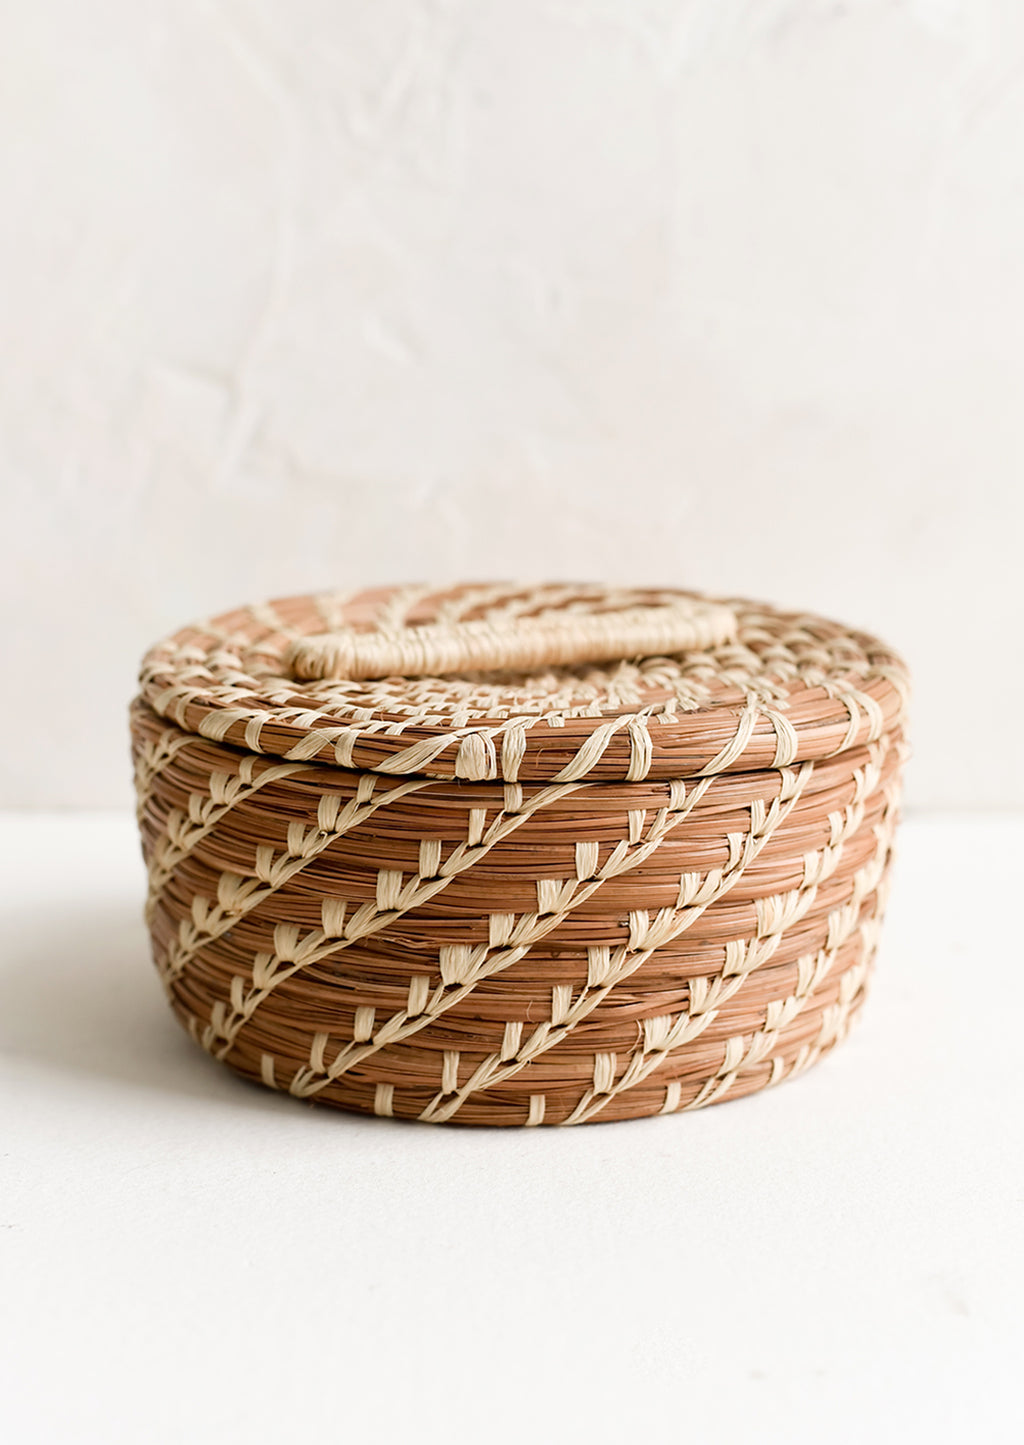 1: A small, round lidded basket made from woven pine needles.